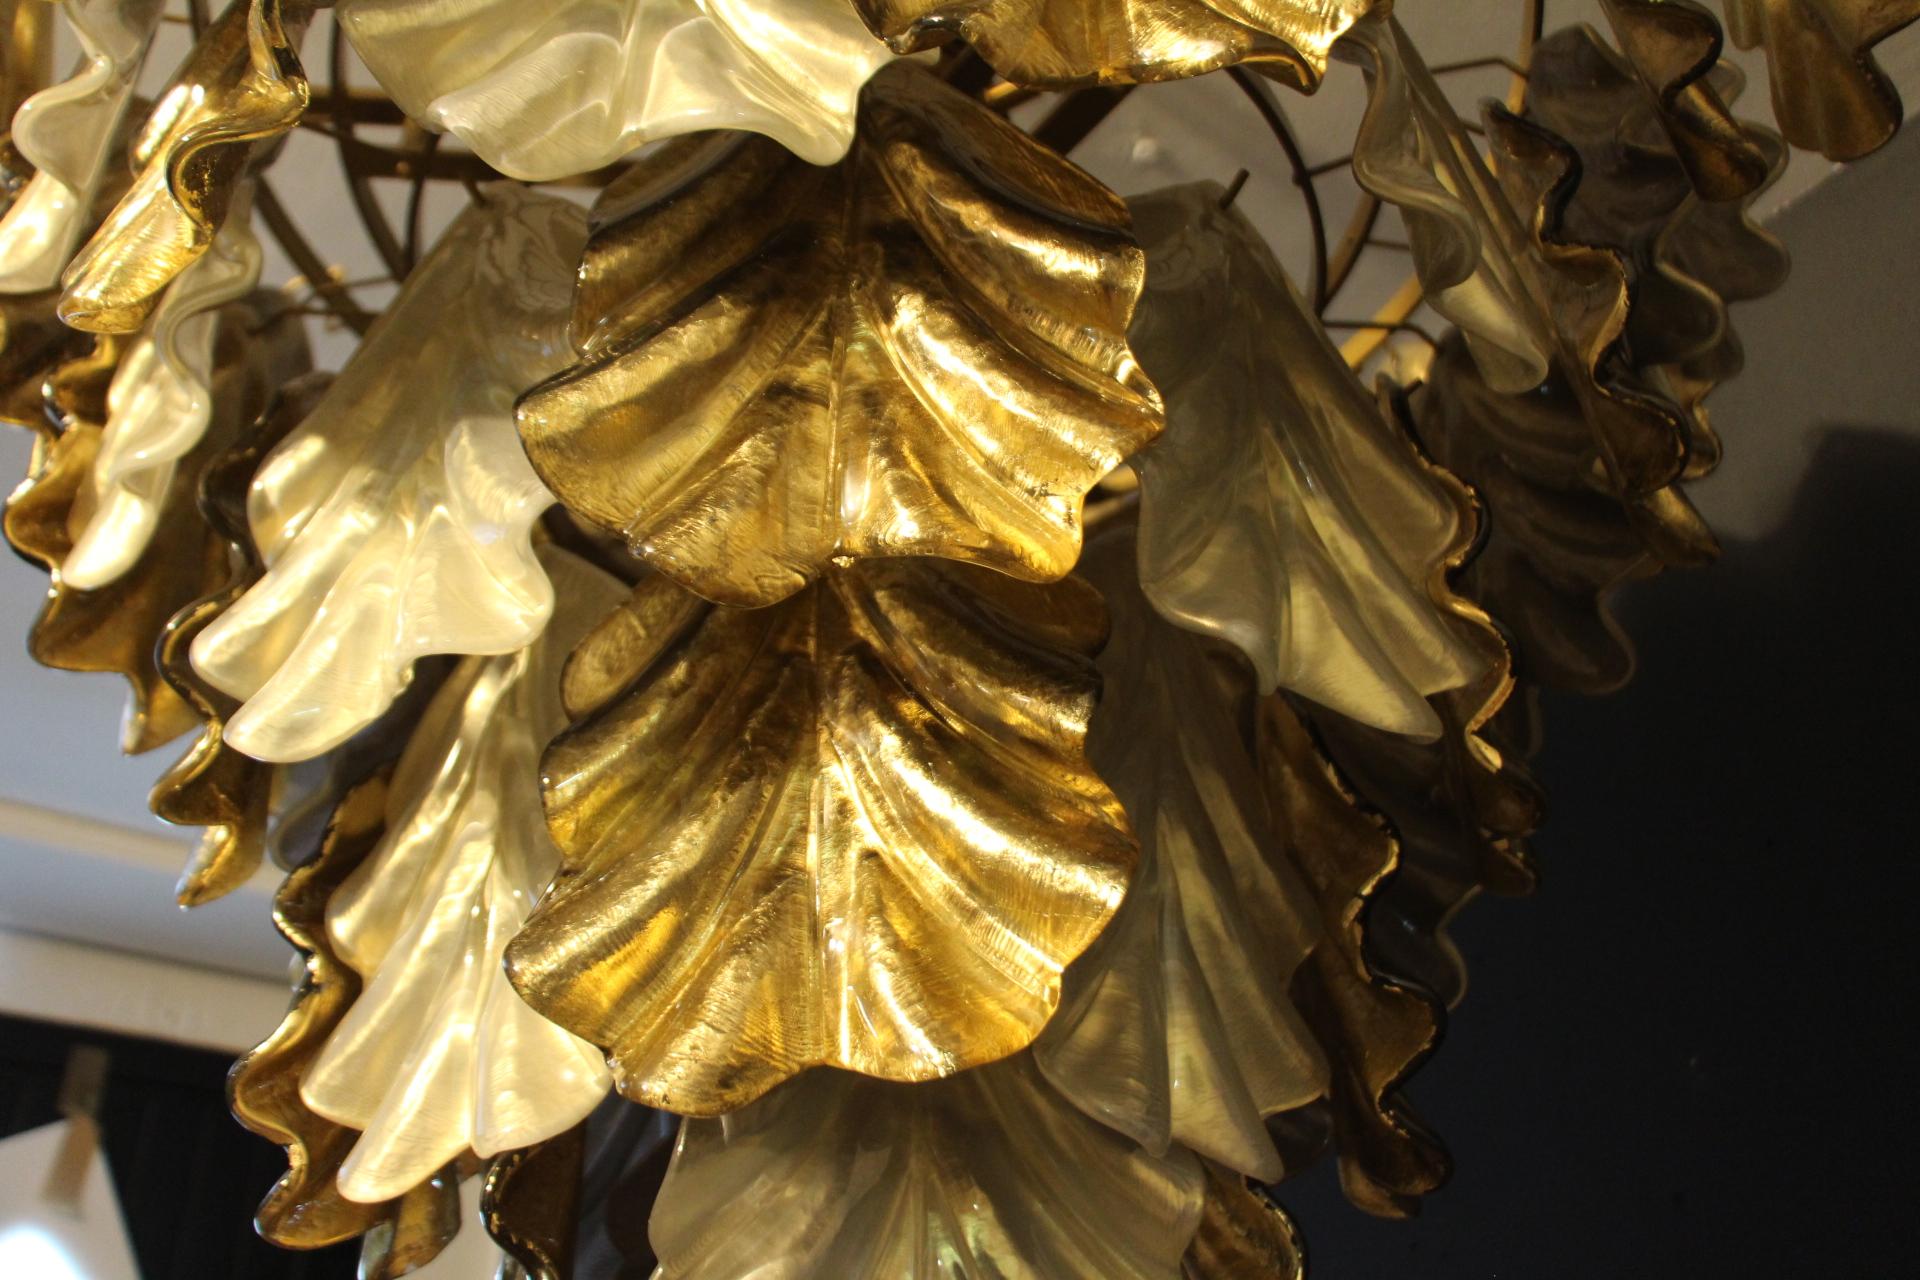 Iridescent Pearly and Golden Italian Murano Glass Chandelier In Barovier Style For Sale 12